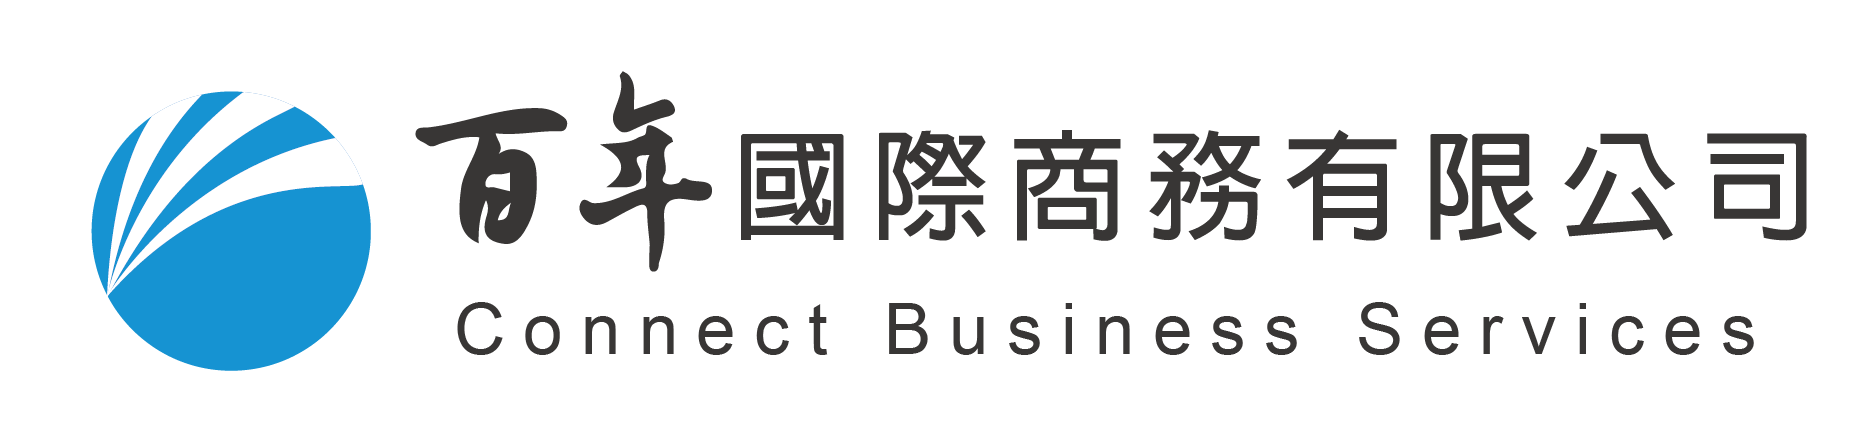 Connect Business Services